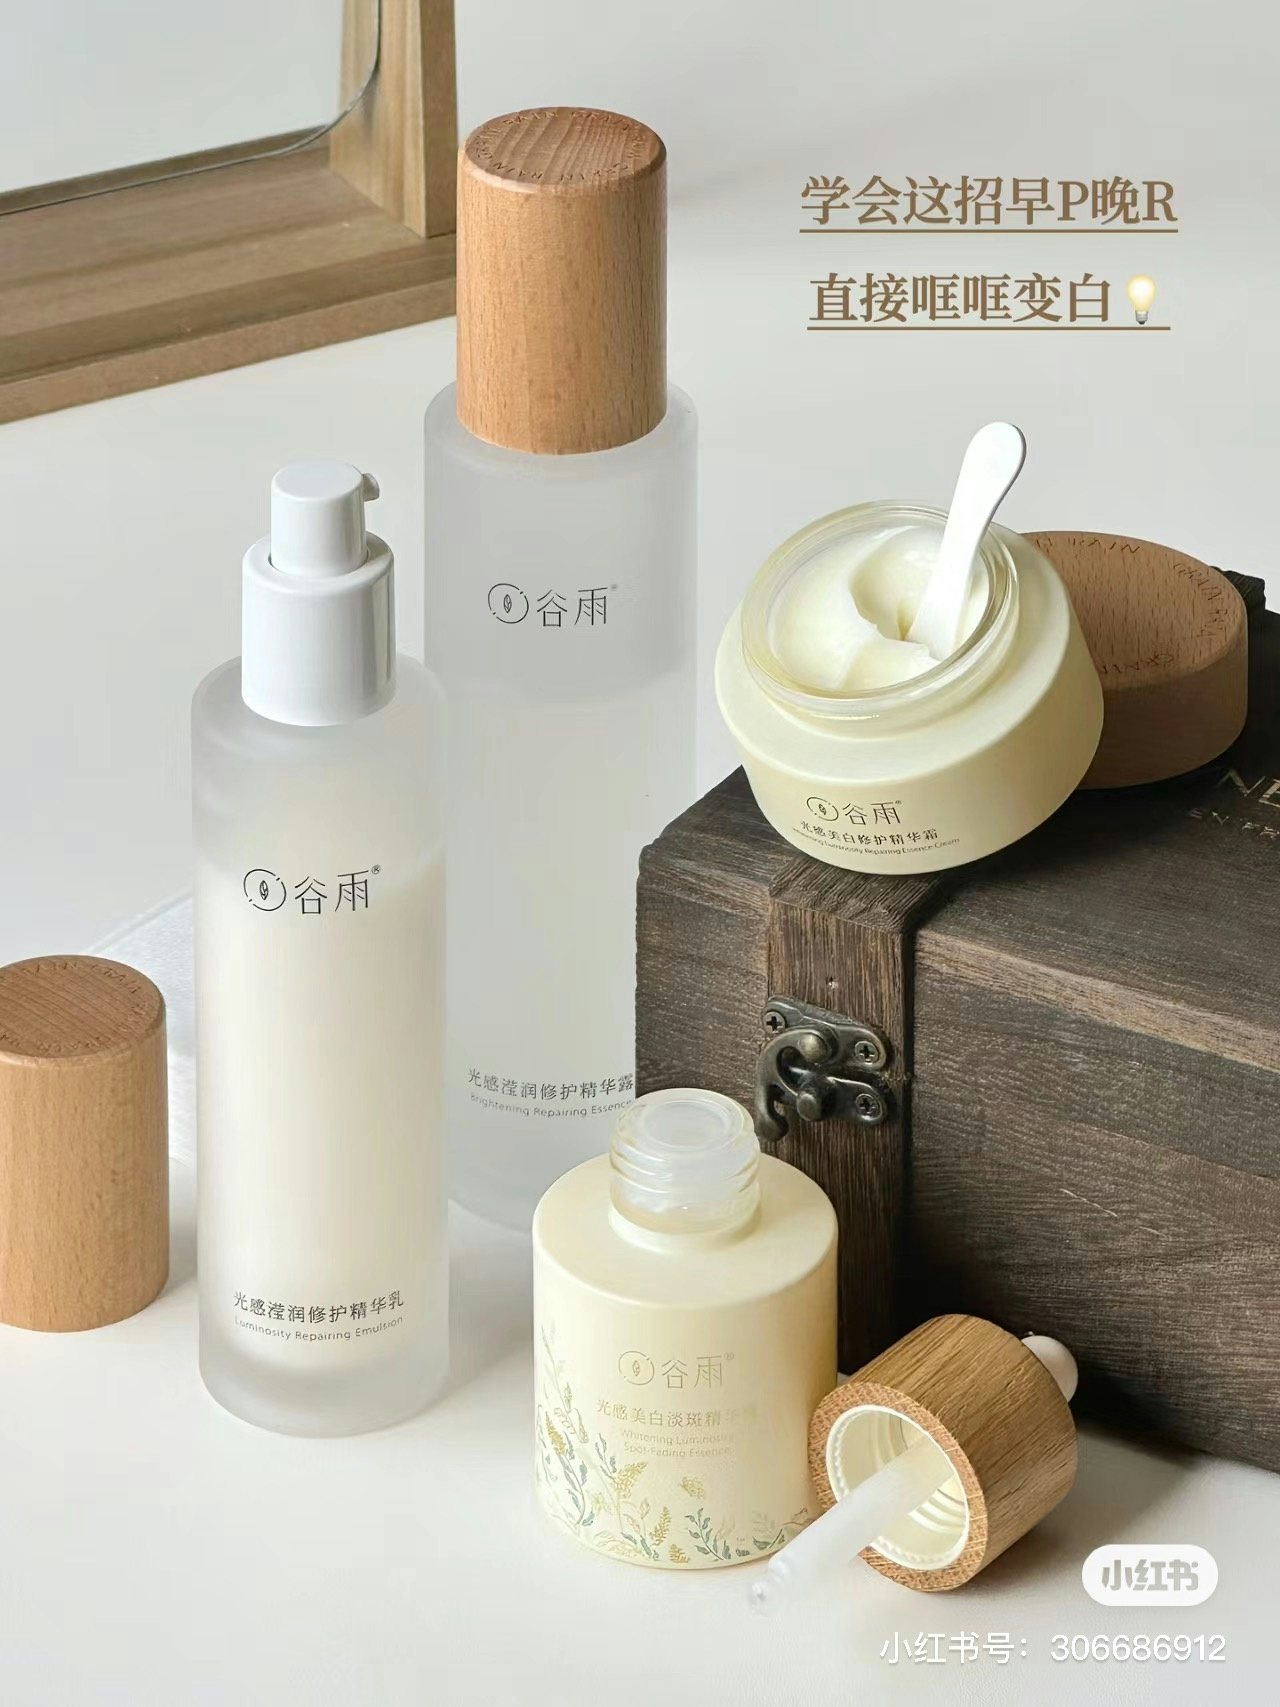 C-derma brands like Winona and Guyu have benefitted from the Morning P Night R trend. Image: Guyu Xiaohongshu